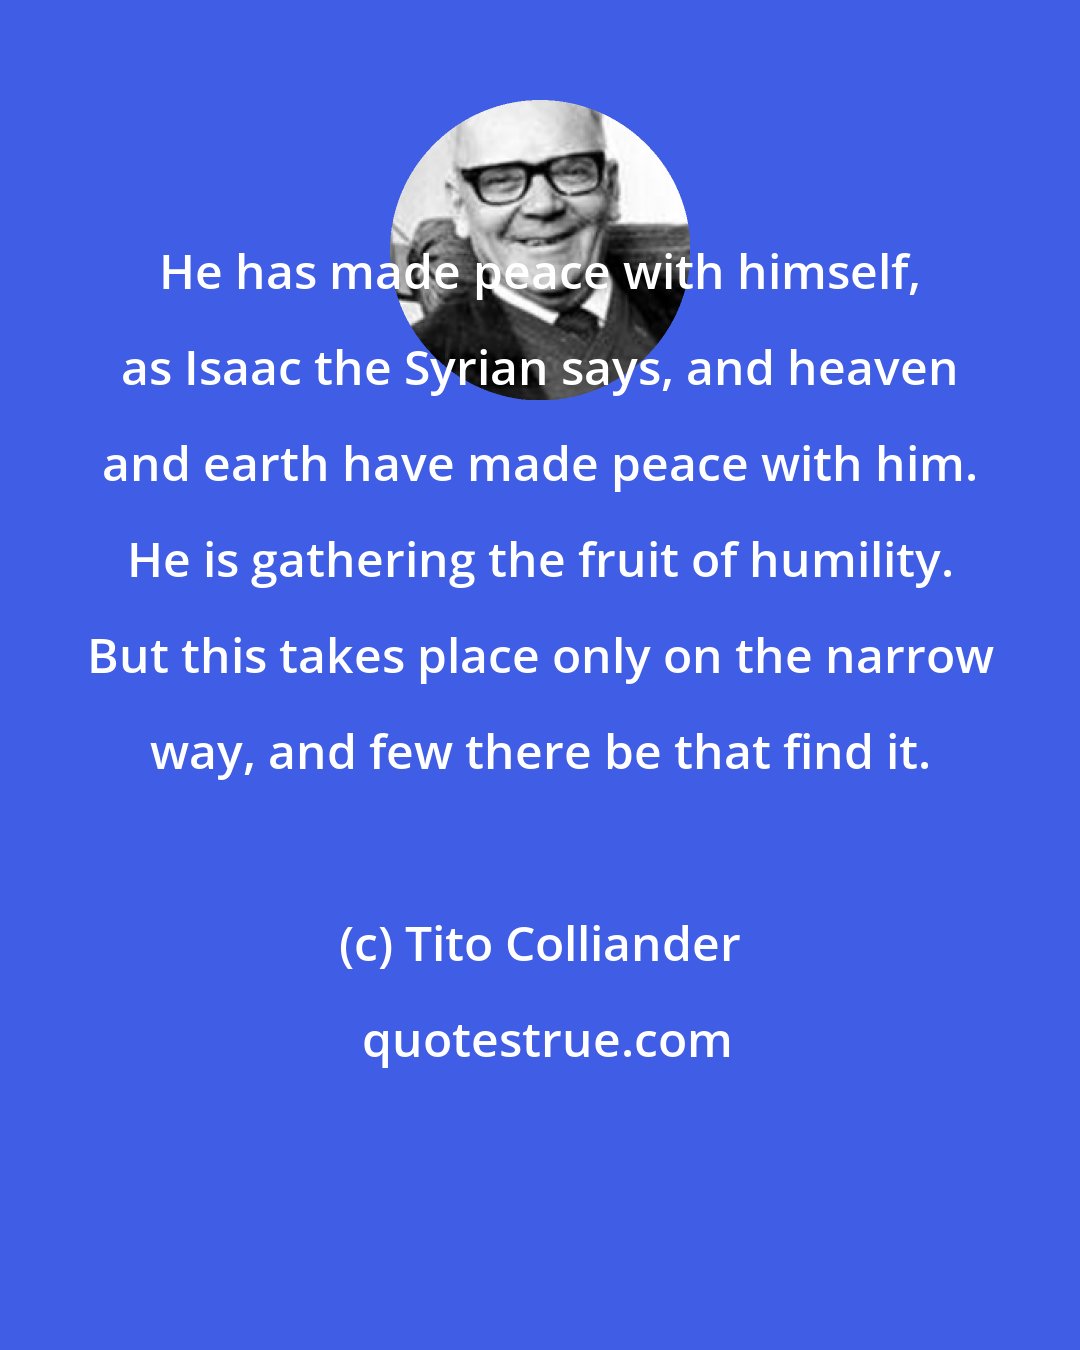 Tito Colliander: He has made peace with himself, as Isaac the Syrian says, and heaven and earth have made peace with him. He is gathering the fruit of humility. But this takes place only on the narrow way, and few there be that find it.